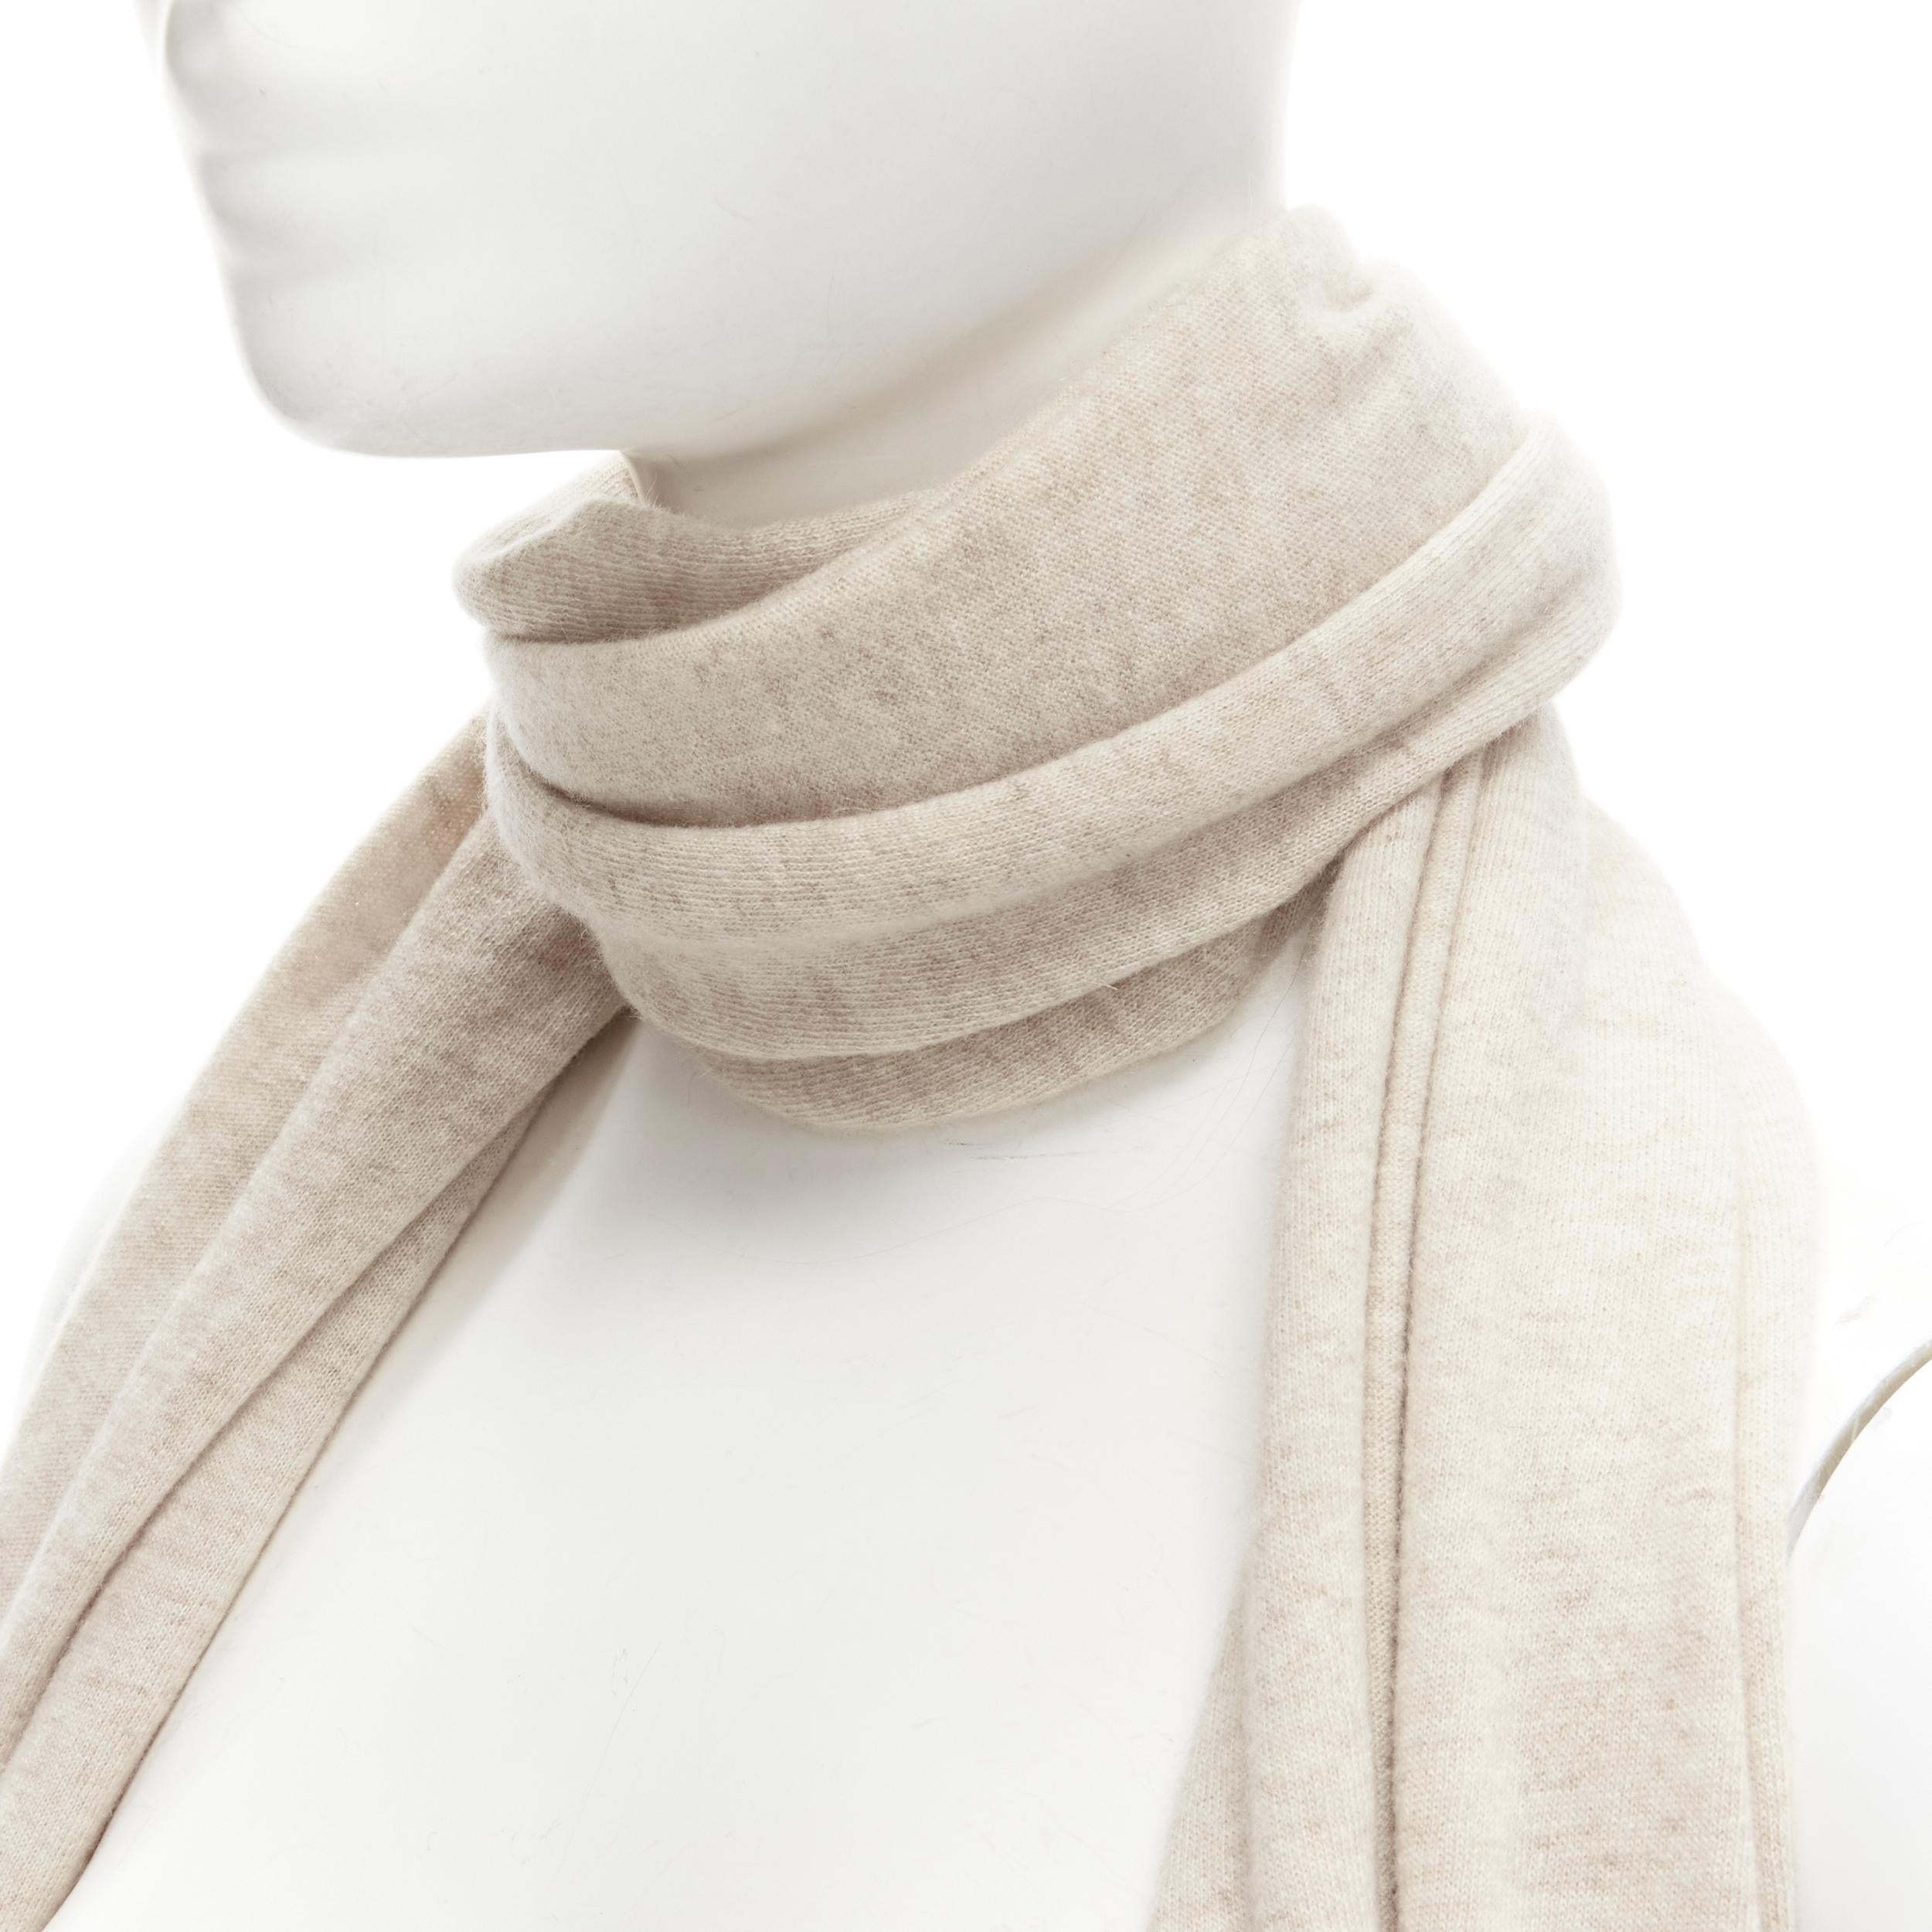 BRUNELLO CUCINELLI 100% cashmere beige rolled edges scarf
Brand: Brunello Cucinelli
Material: Cashmere
Color: Beige
Pattern: Solid
Extra Detail: Rolled edges.
Made in: Italy

CONDITION:
Condition: Good, this item was pre-owned and is in good